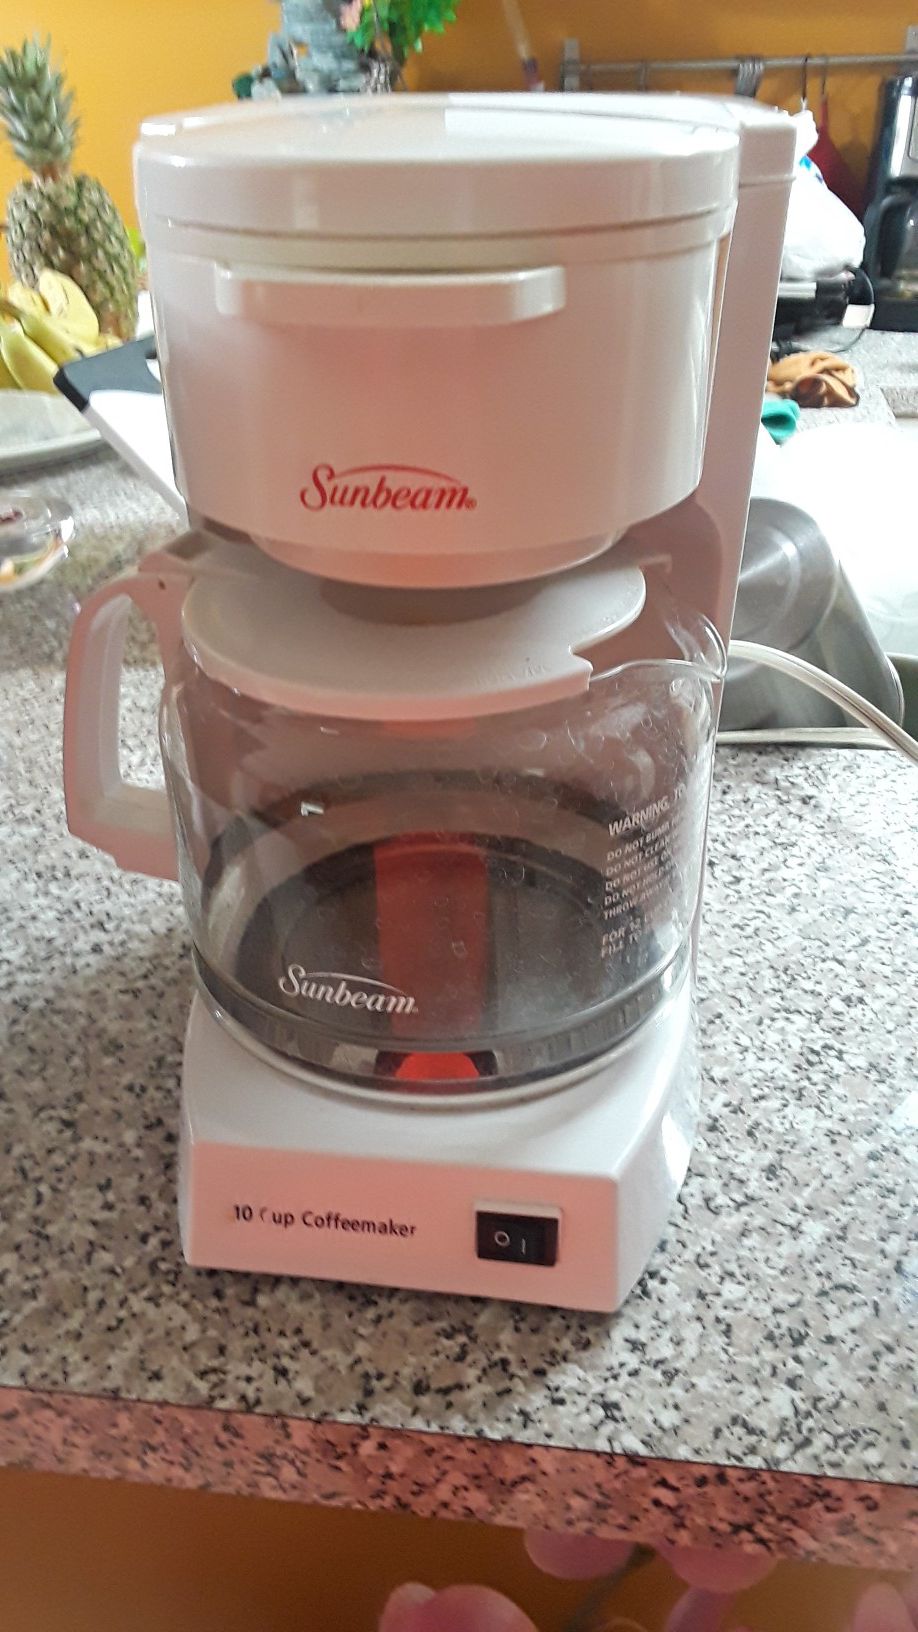 Imusa Cafetera Eléctrica for Sale in Hialeah, FL - OfferUp